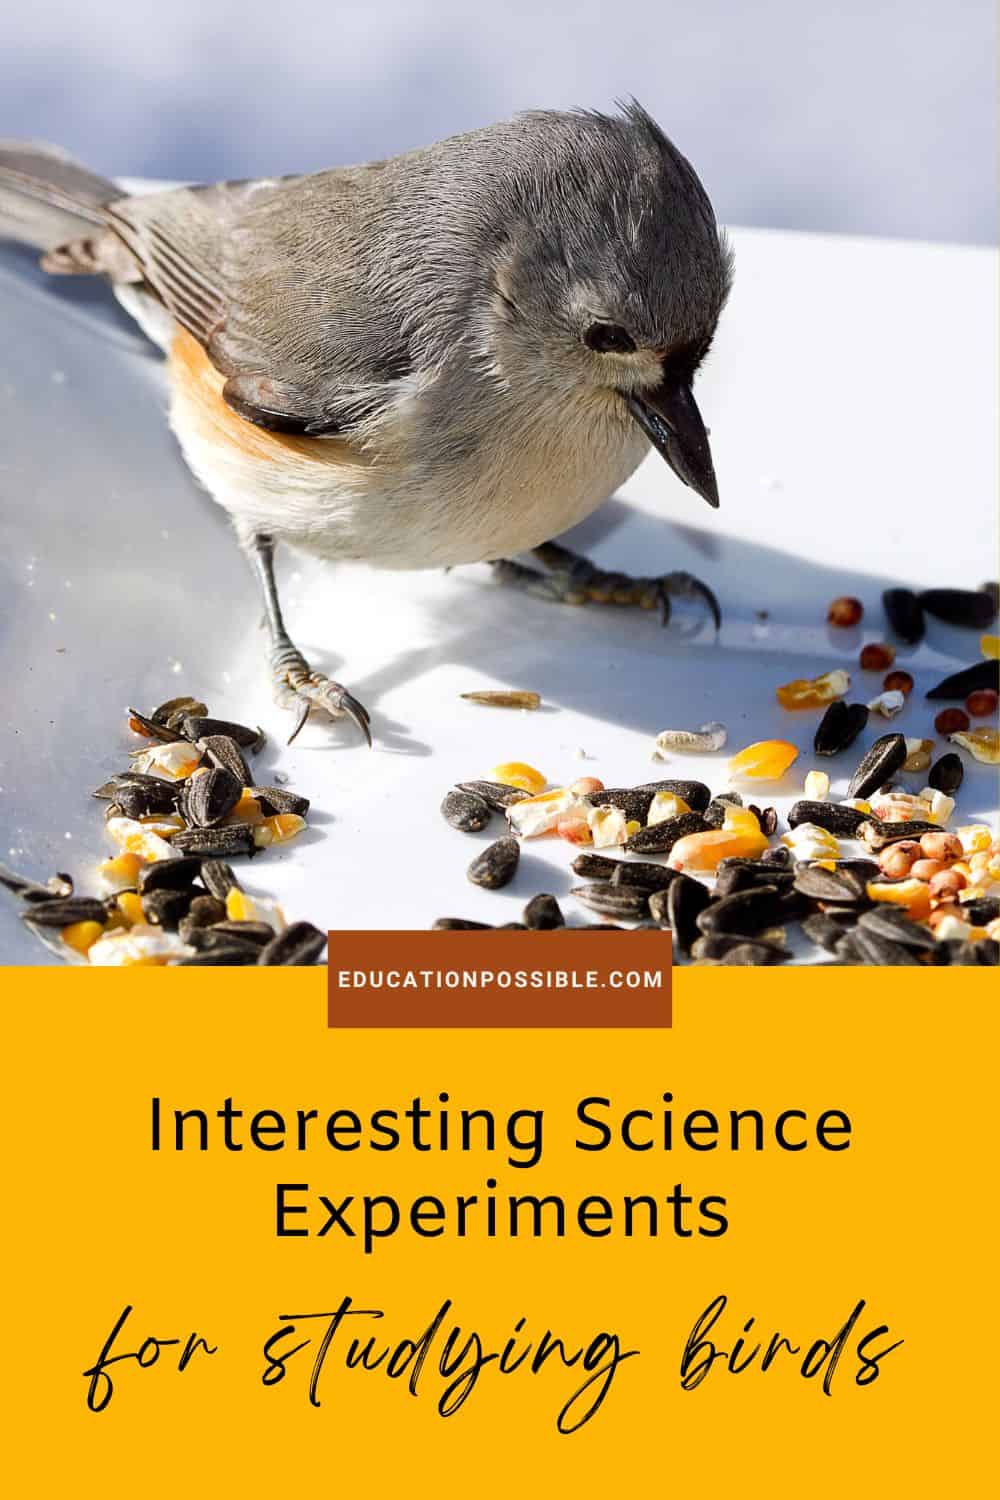 Interesting Bird Experiments for Middle School Science